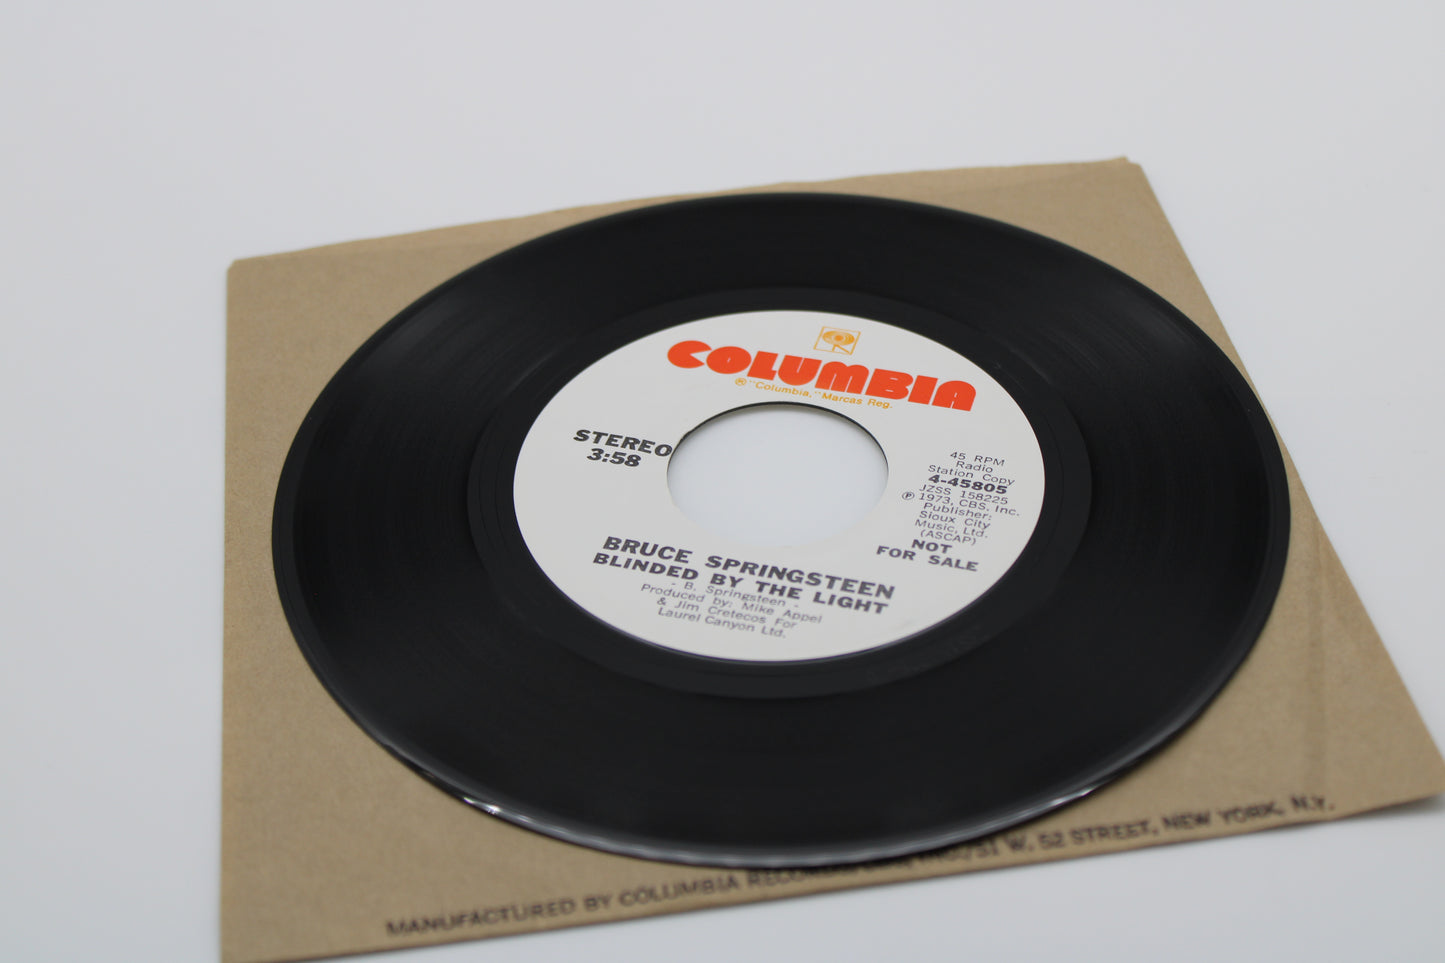 Bruce Springsteen "Blinded By the Light" 45 Columbia Records 'Radio Station Copy' - Near Mint Collectible